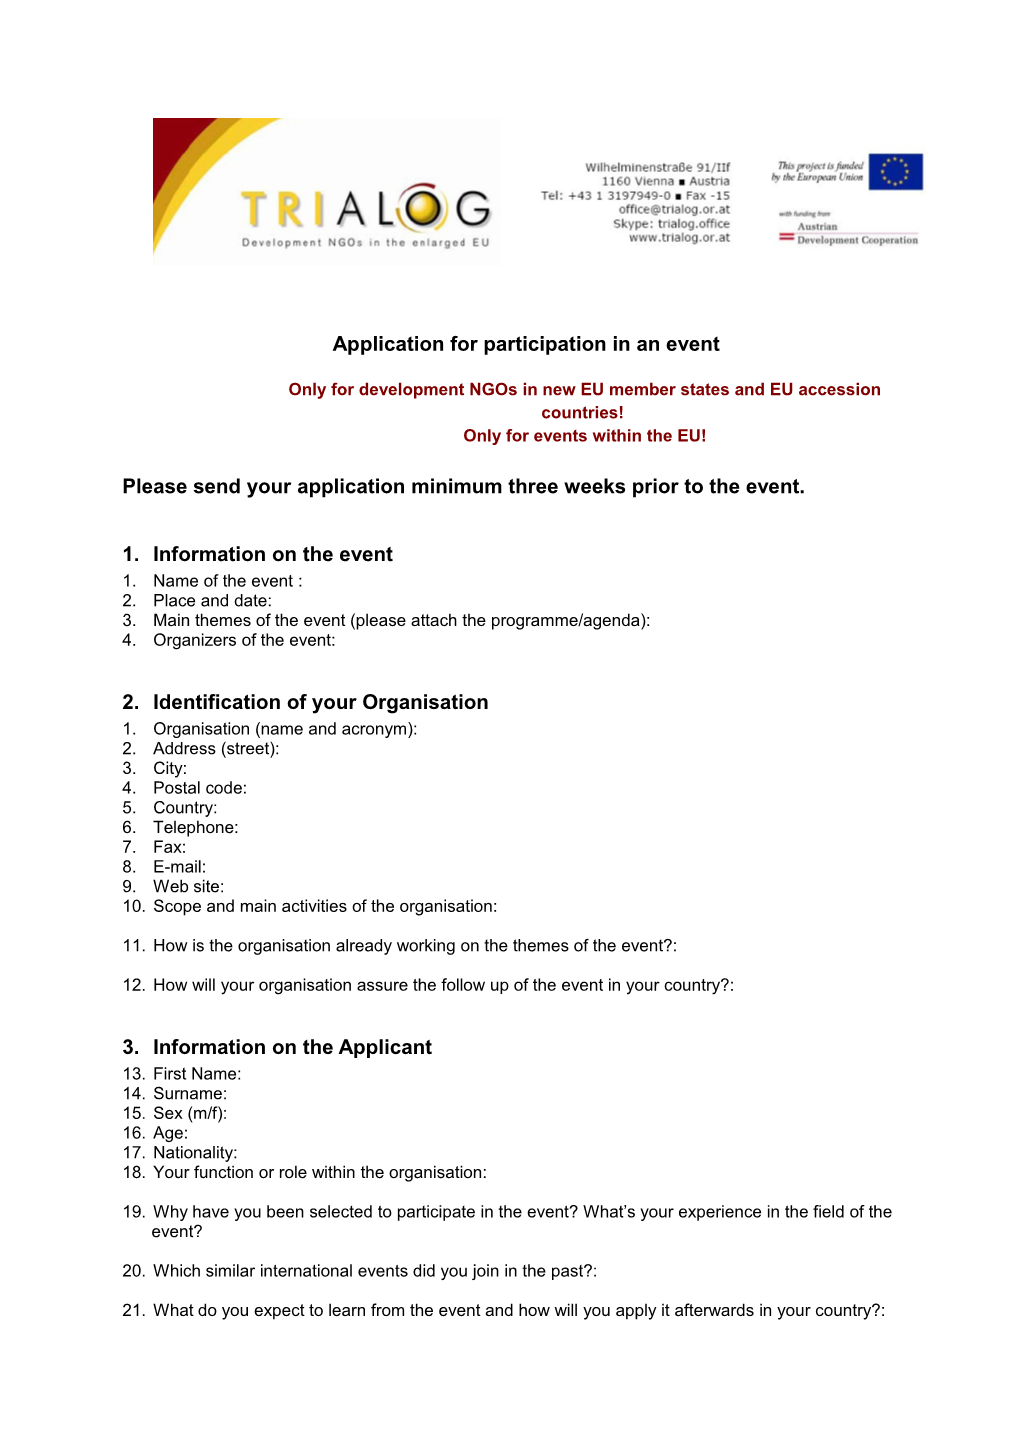 Application for Participation in an Event